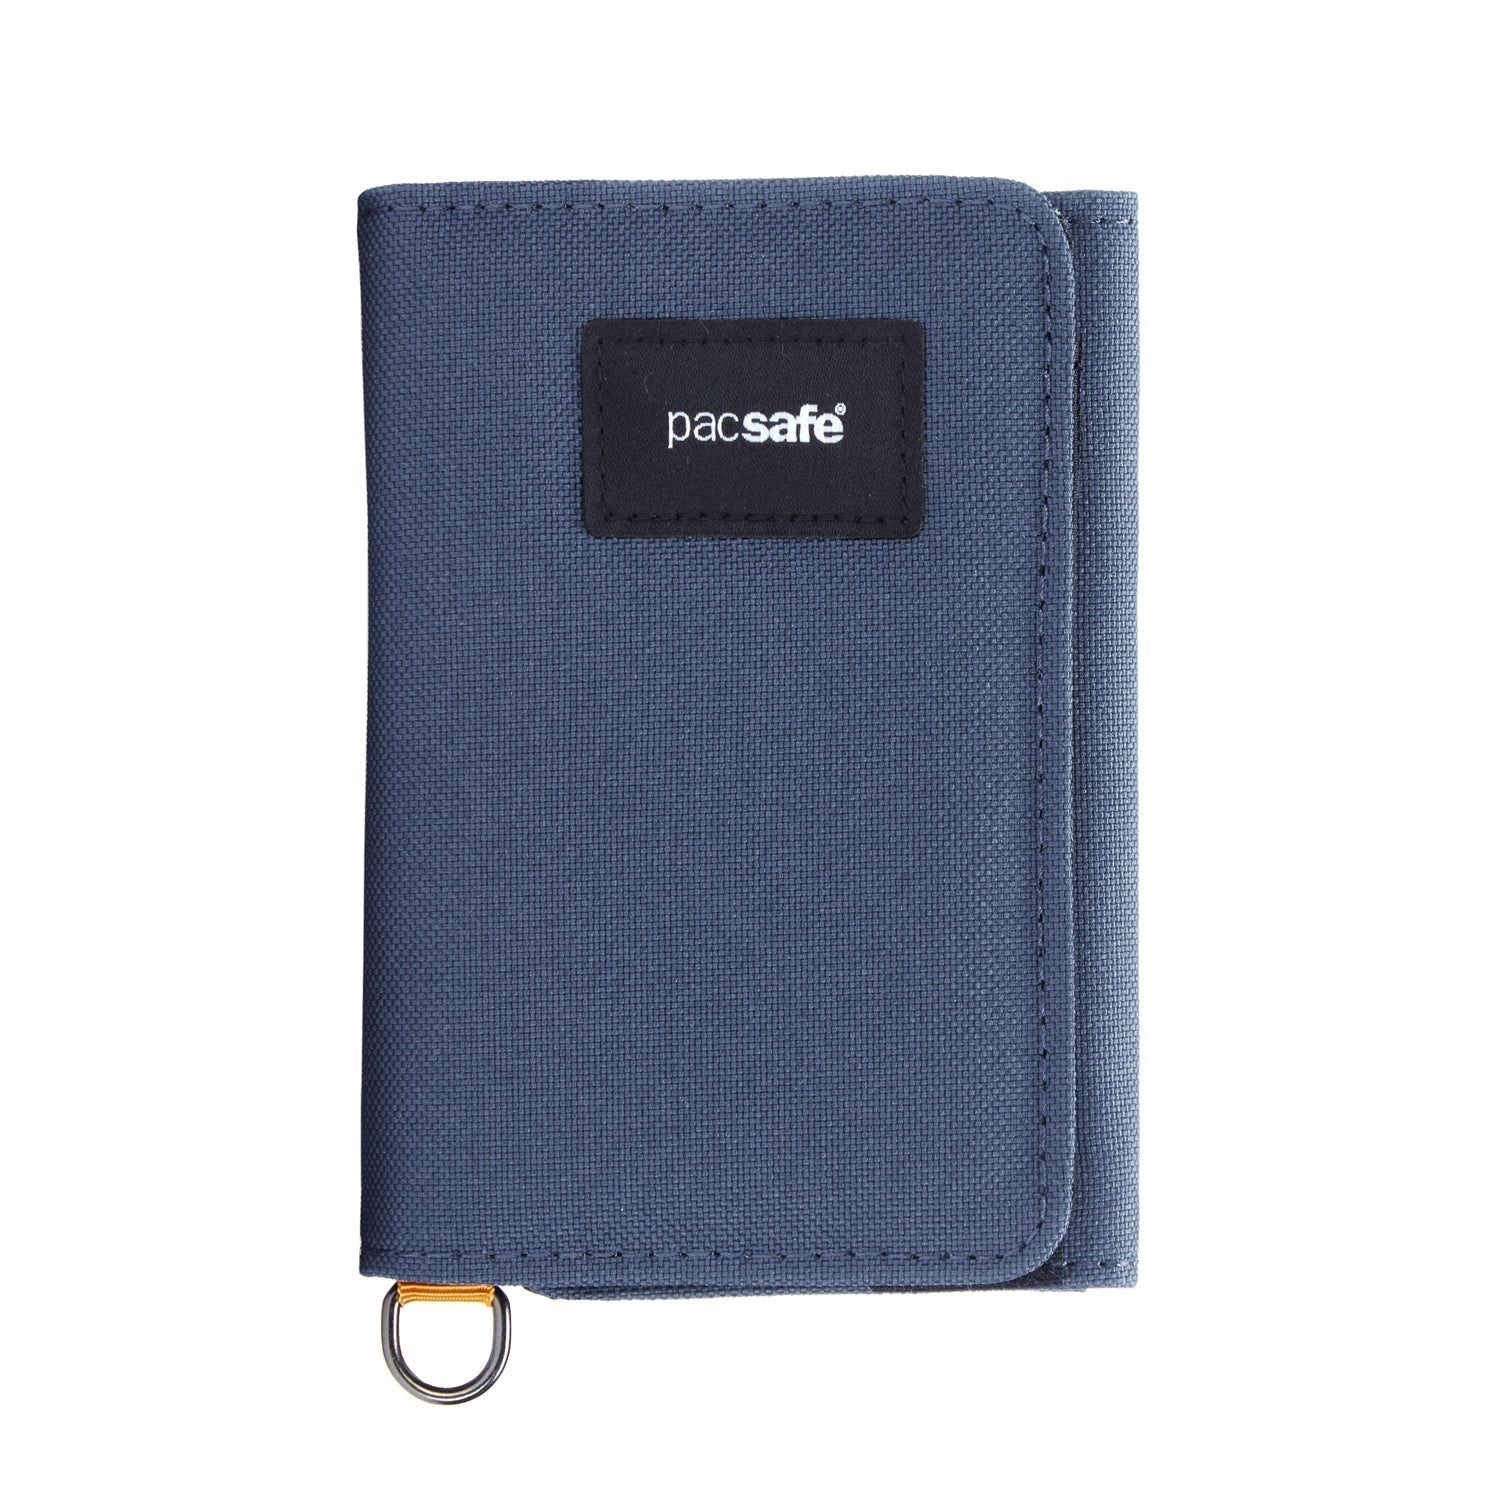 Anti Theft Slim Aluminum Wallet With Elasticity Back Pouch Id